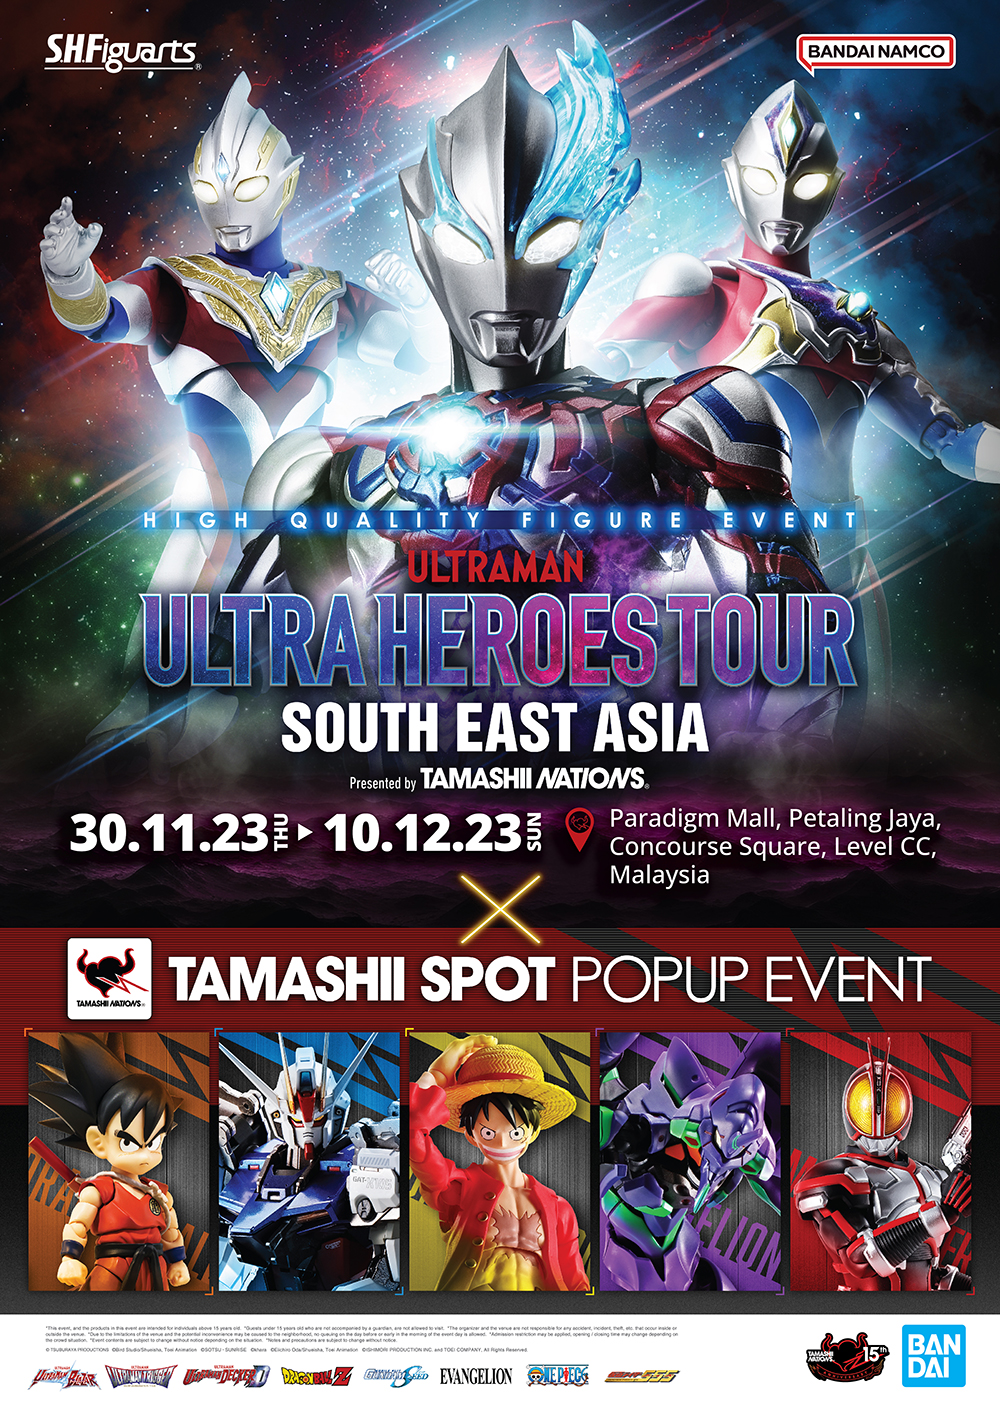 ULTRA HEROES TOUR SOUTH EAST ASIA　Feat TAMASHII SPOT POP UP